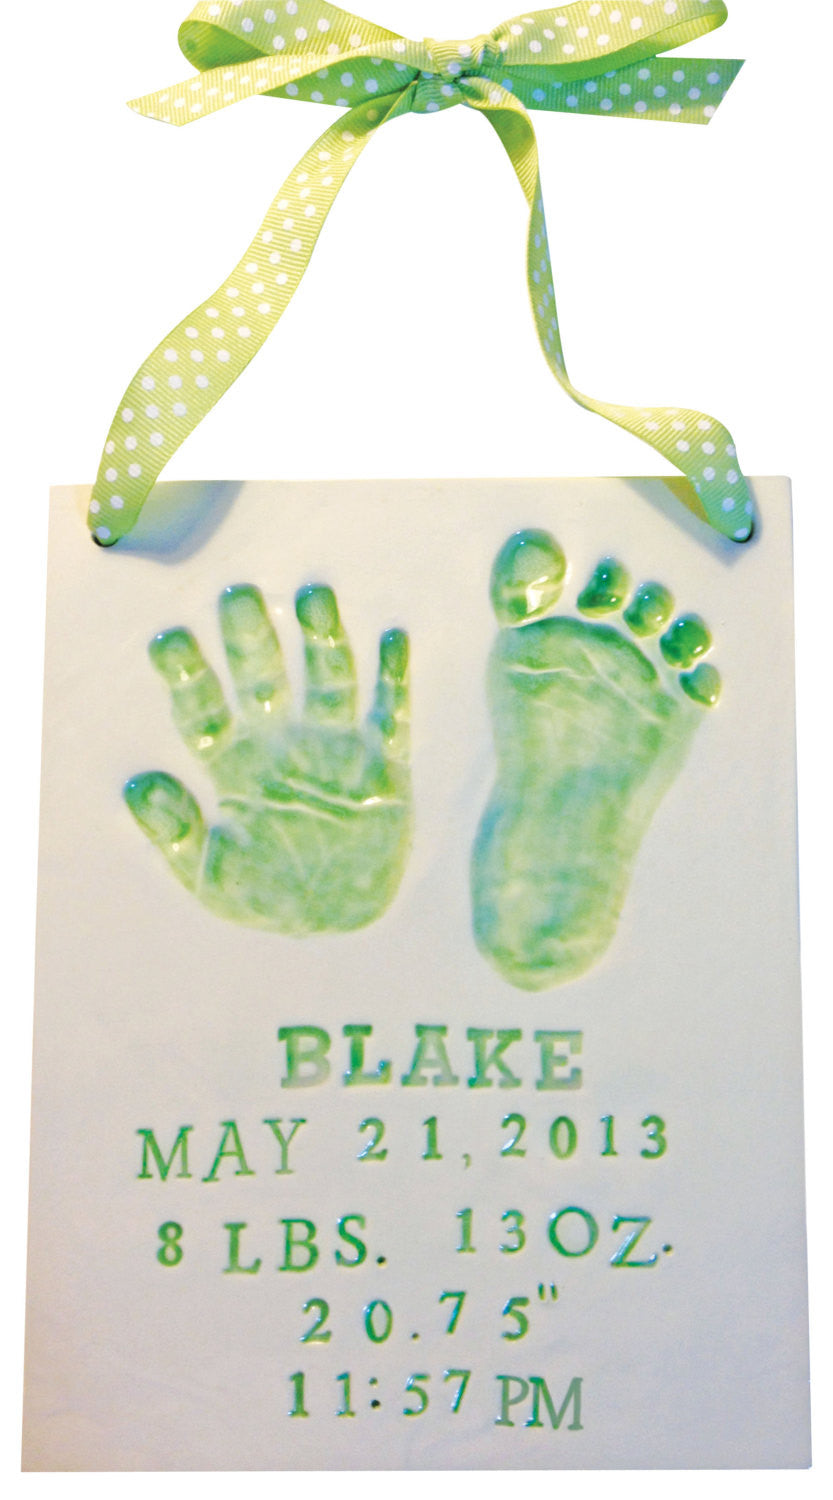 Baby Handprint Footprint Ornament Keepsake Kit - Newborn Imprint Ornament  Kit for Baby Girl, Boy - Personalized New Baby Gifts for New Parents - Hand